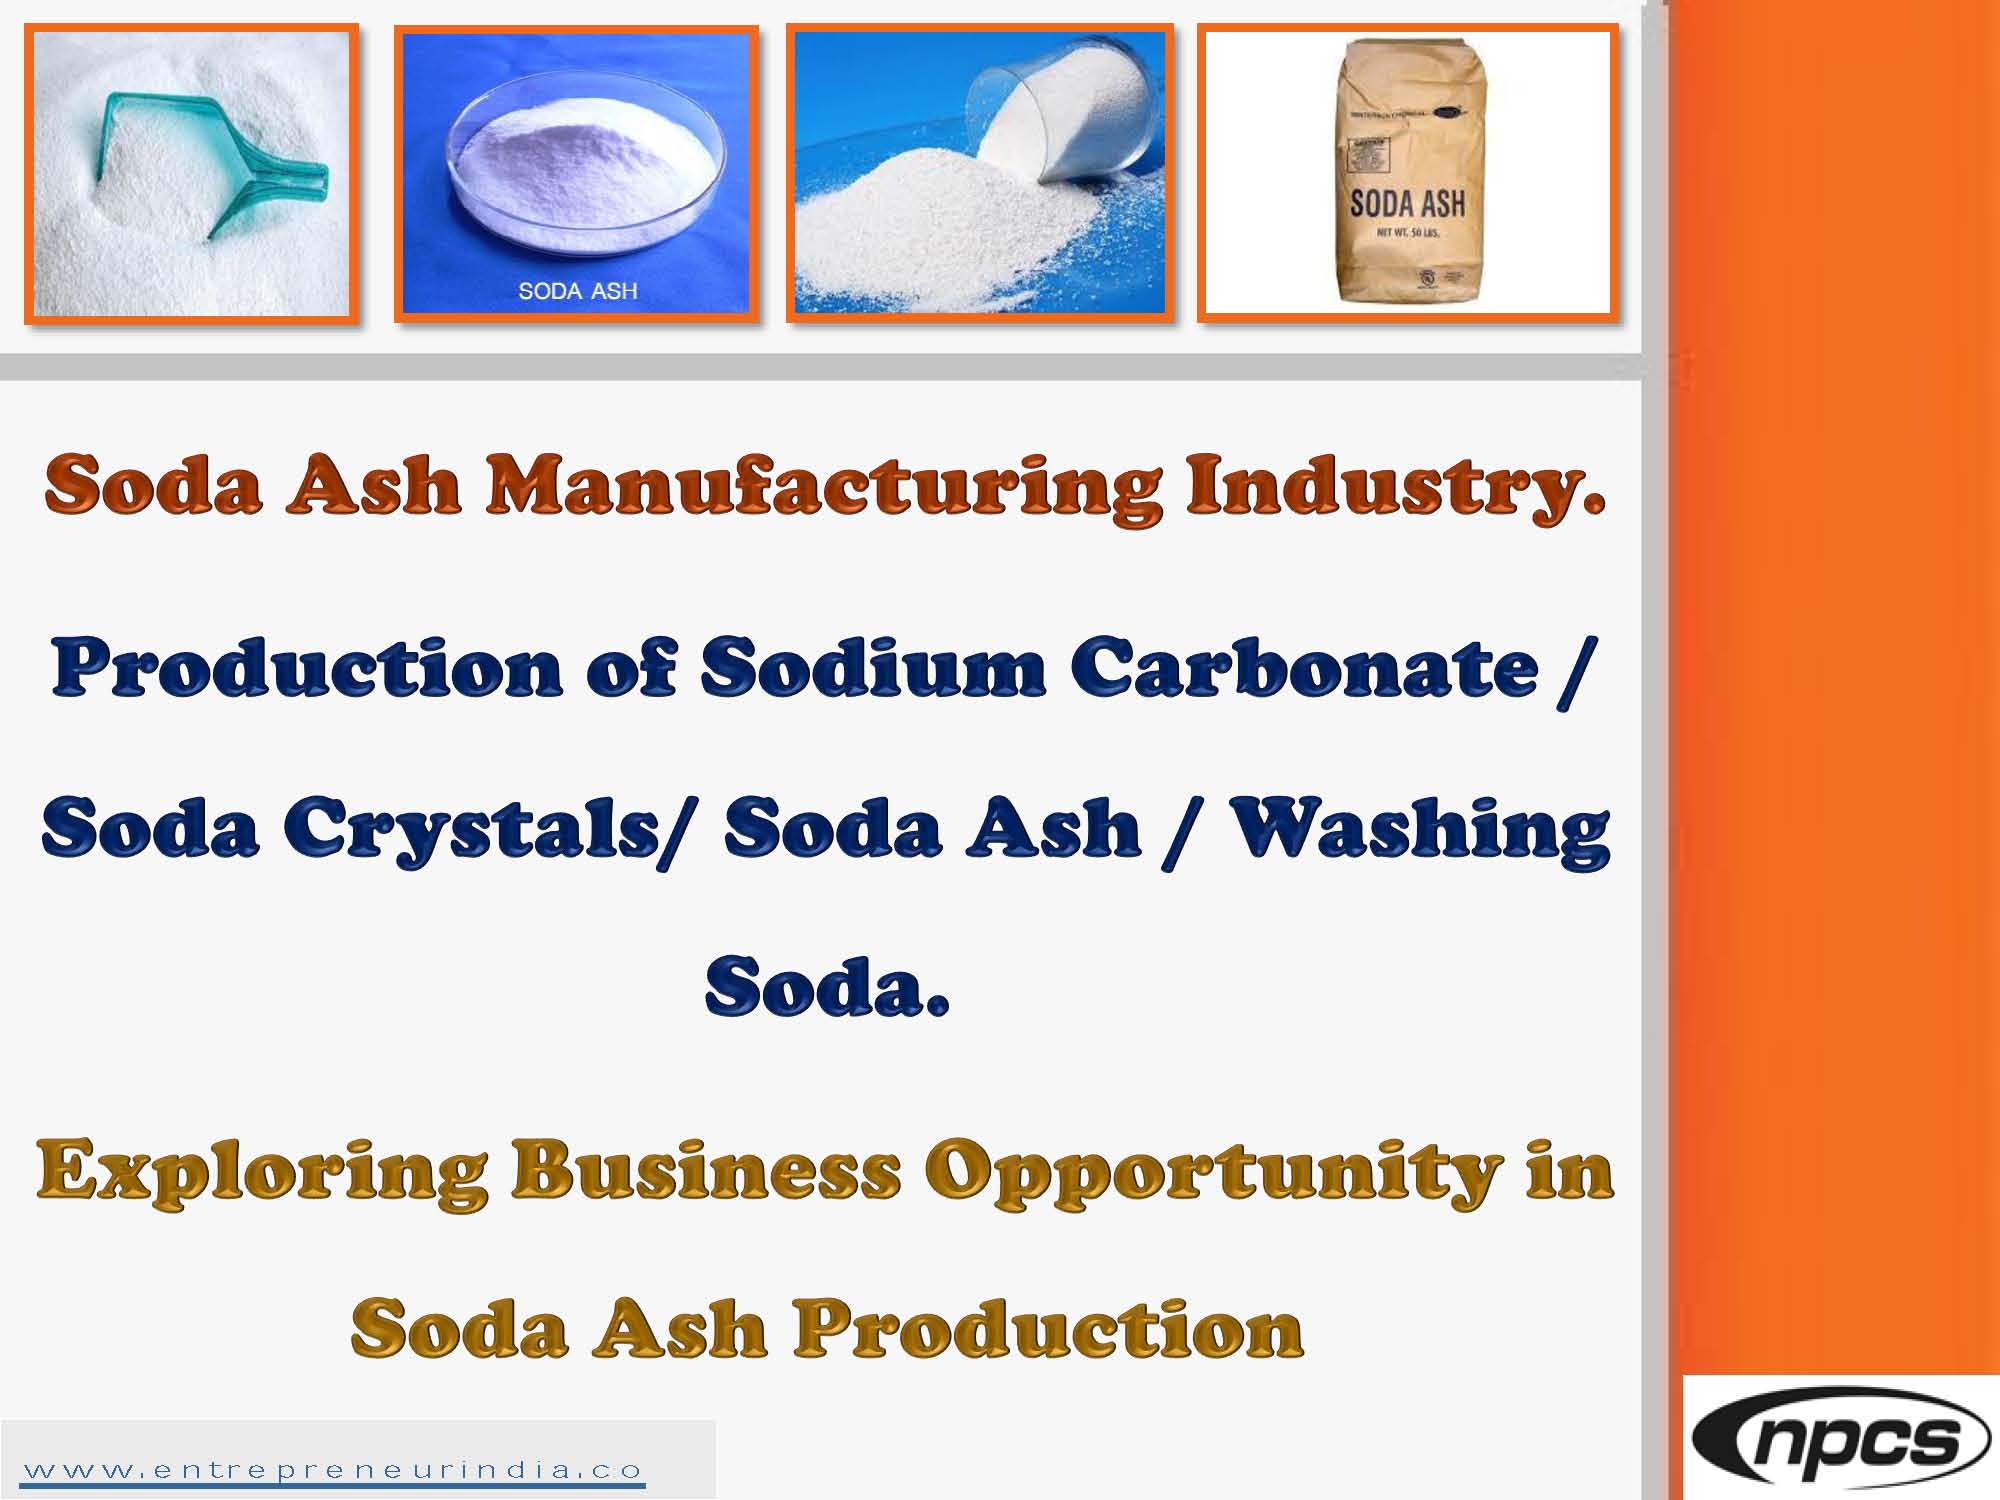 Soda Ash Manufacturing Industry